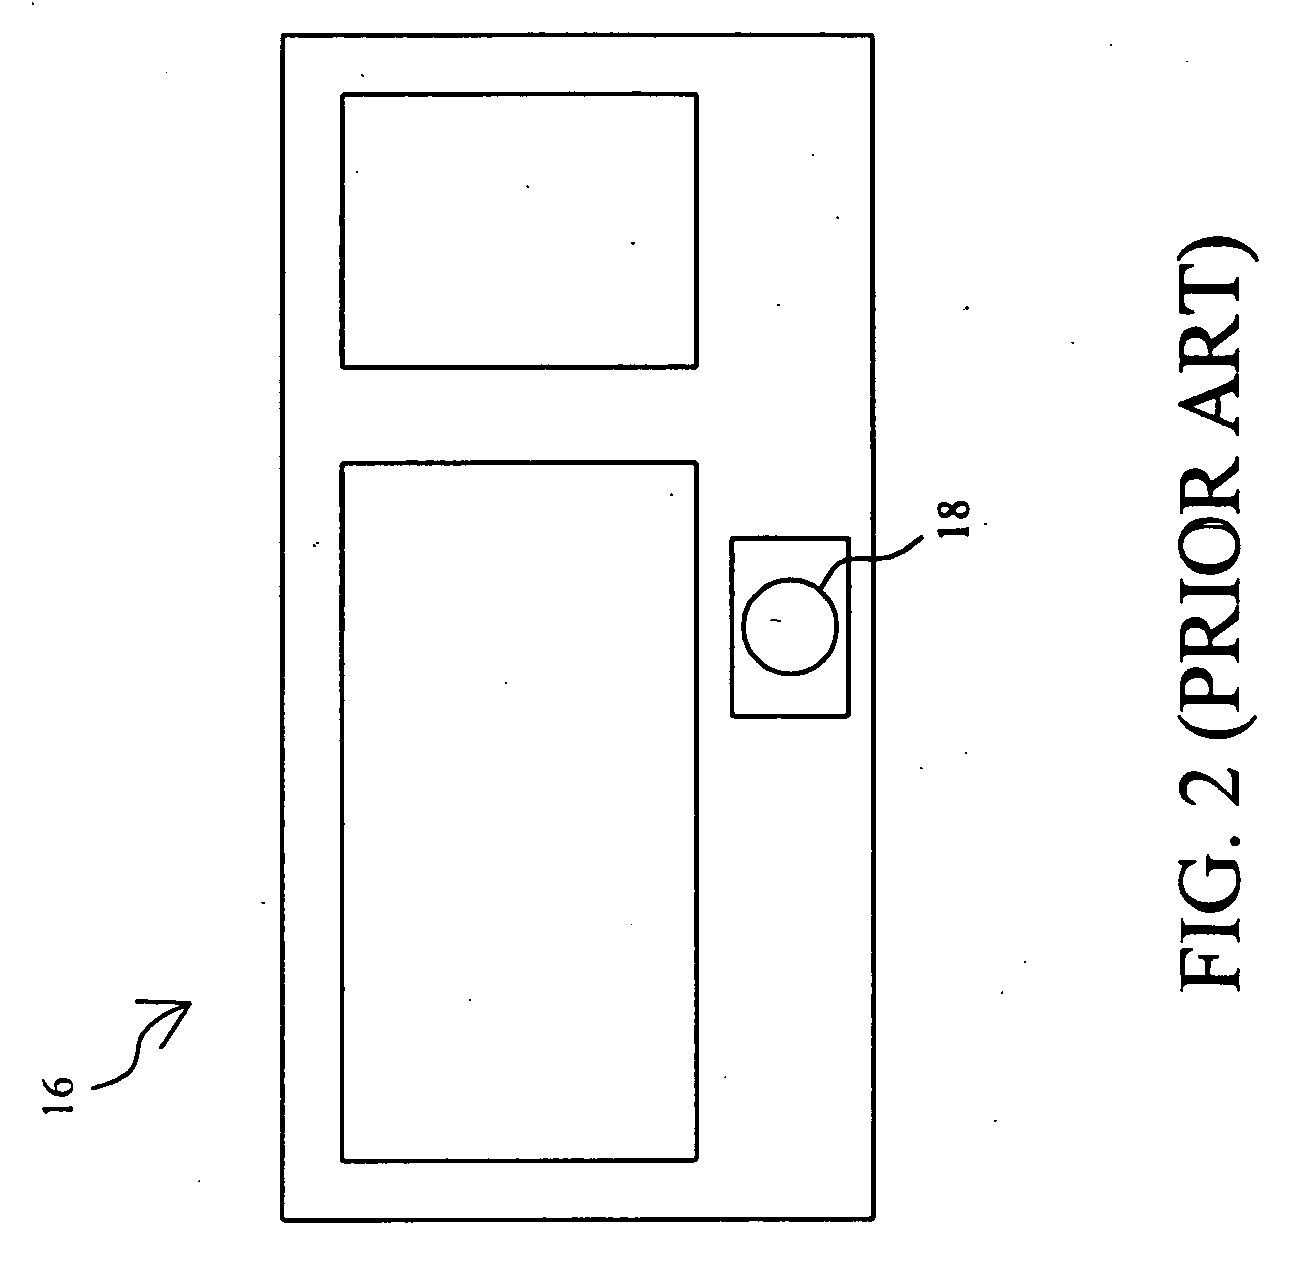 Apparatus with one or more capacitive touchpads as interface